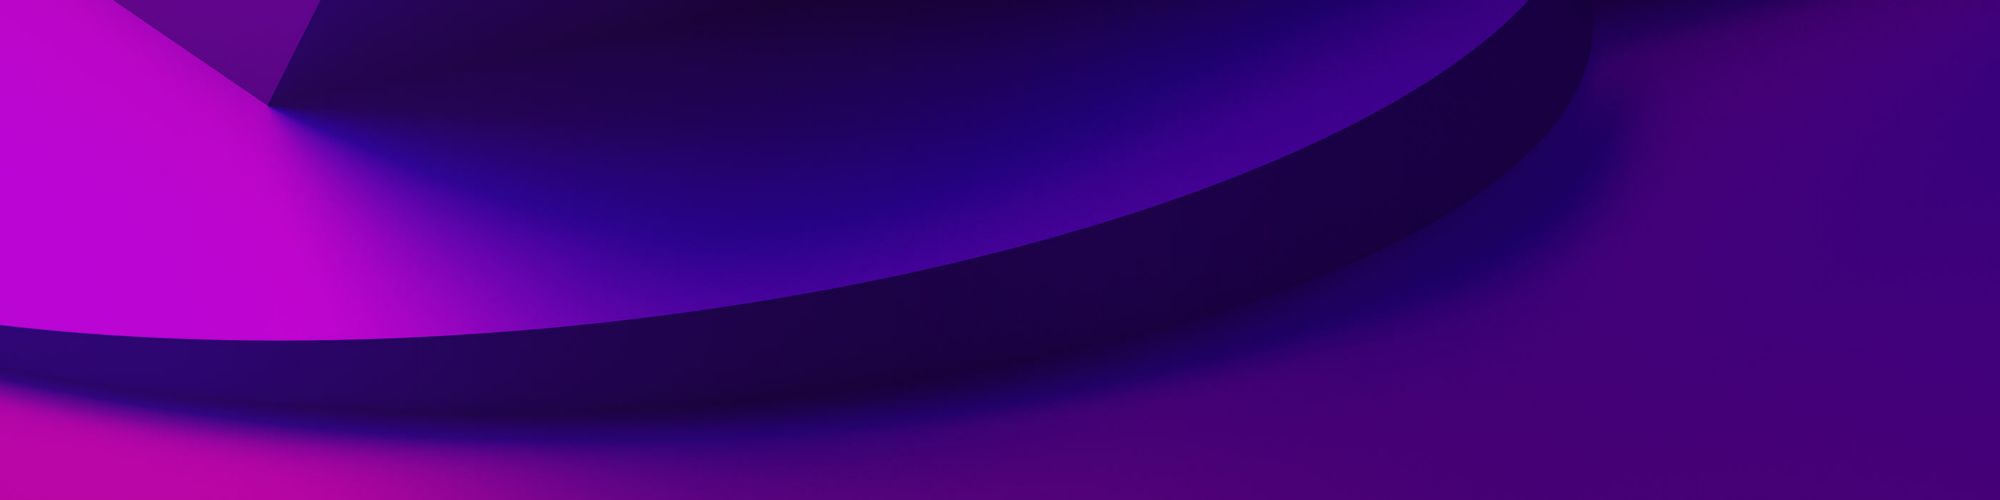 Abstract shapes on purple background